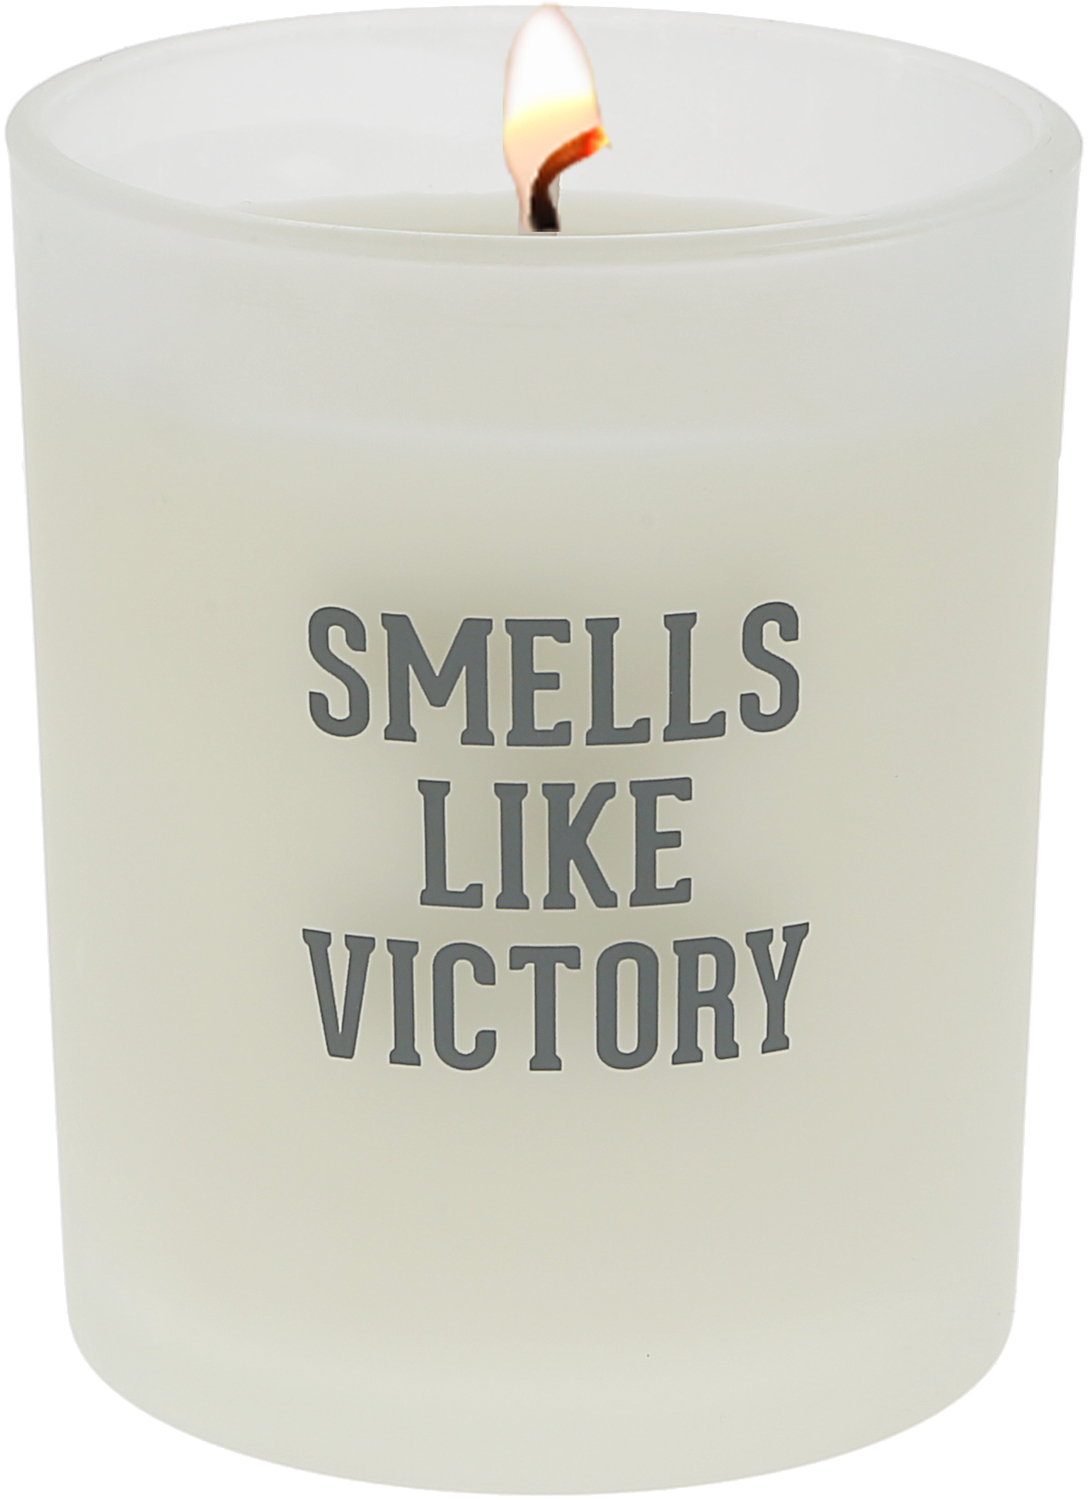 Victory by Repre-Scent - Victory - 5.5 oz - 100% Soy Wax Candle Scent: Tranquility